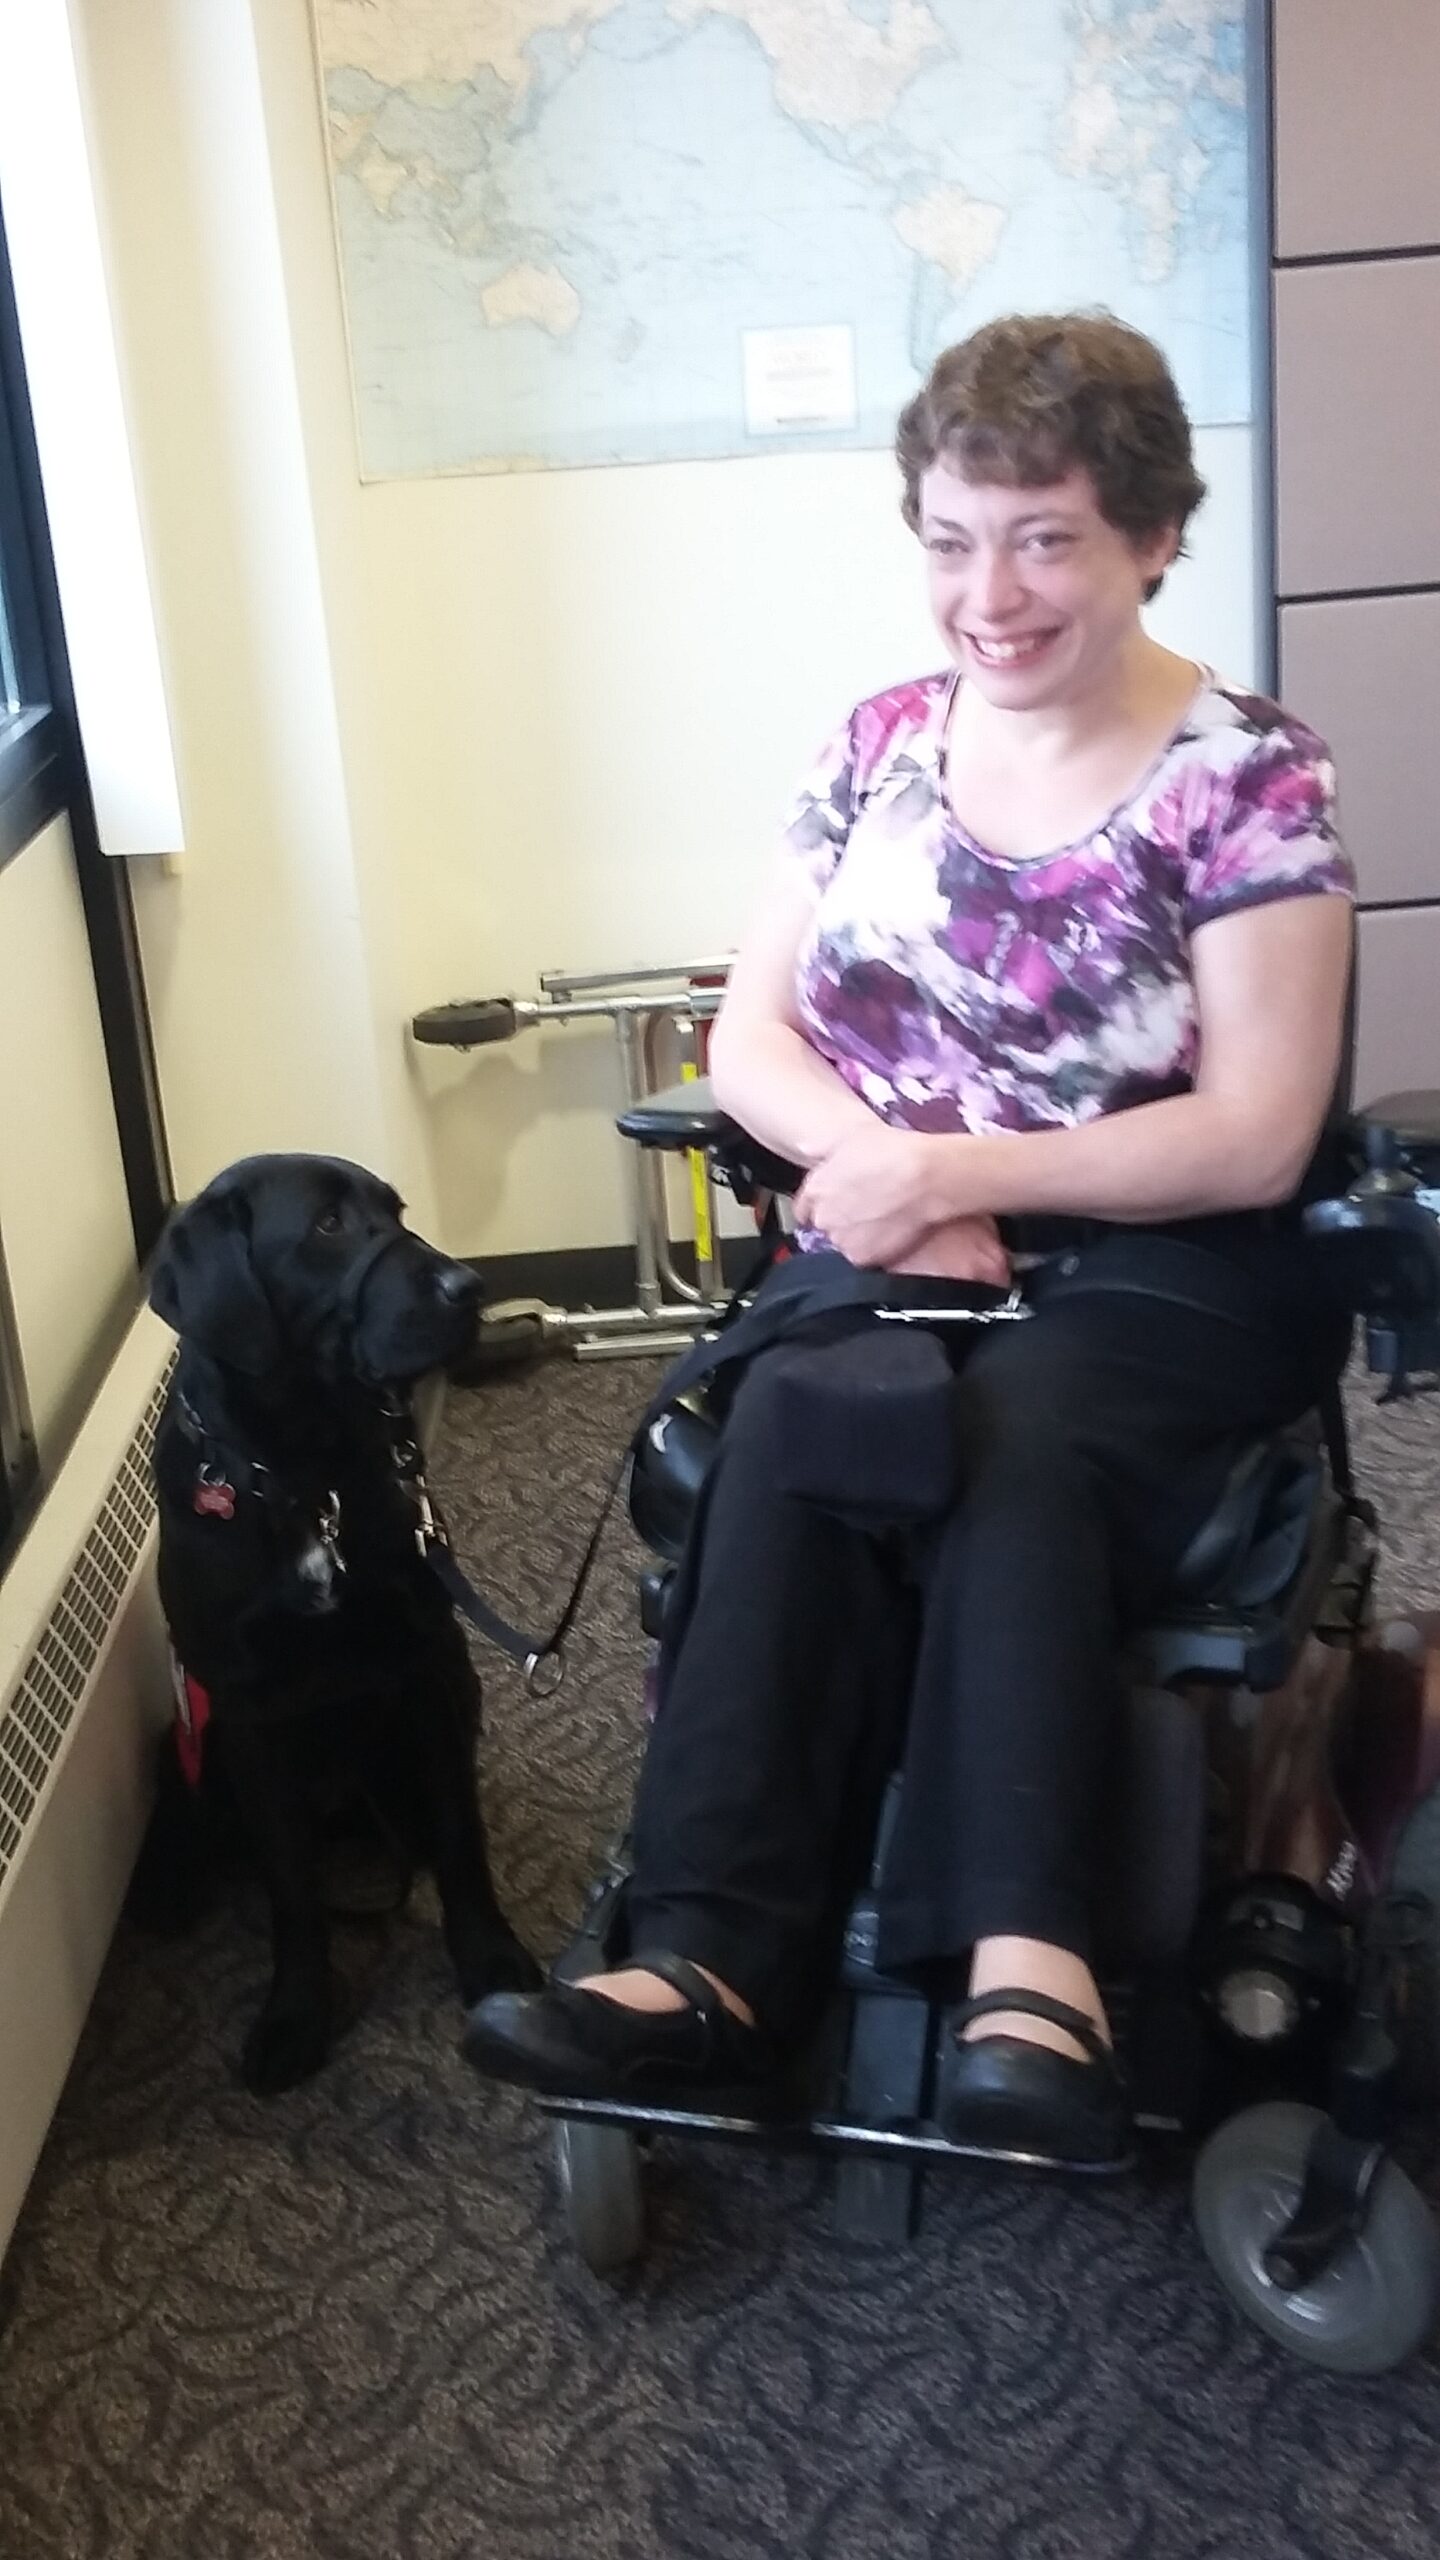 Tracy is smiling next to her mobility assist dog, Gidget.